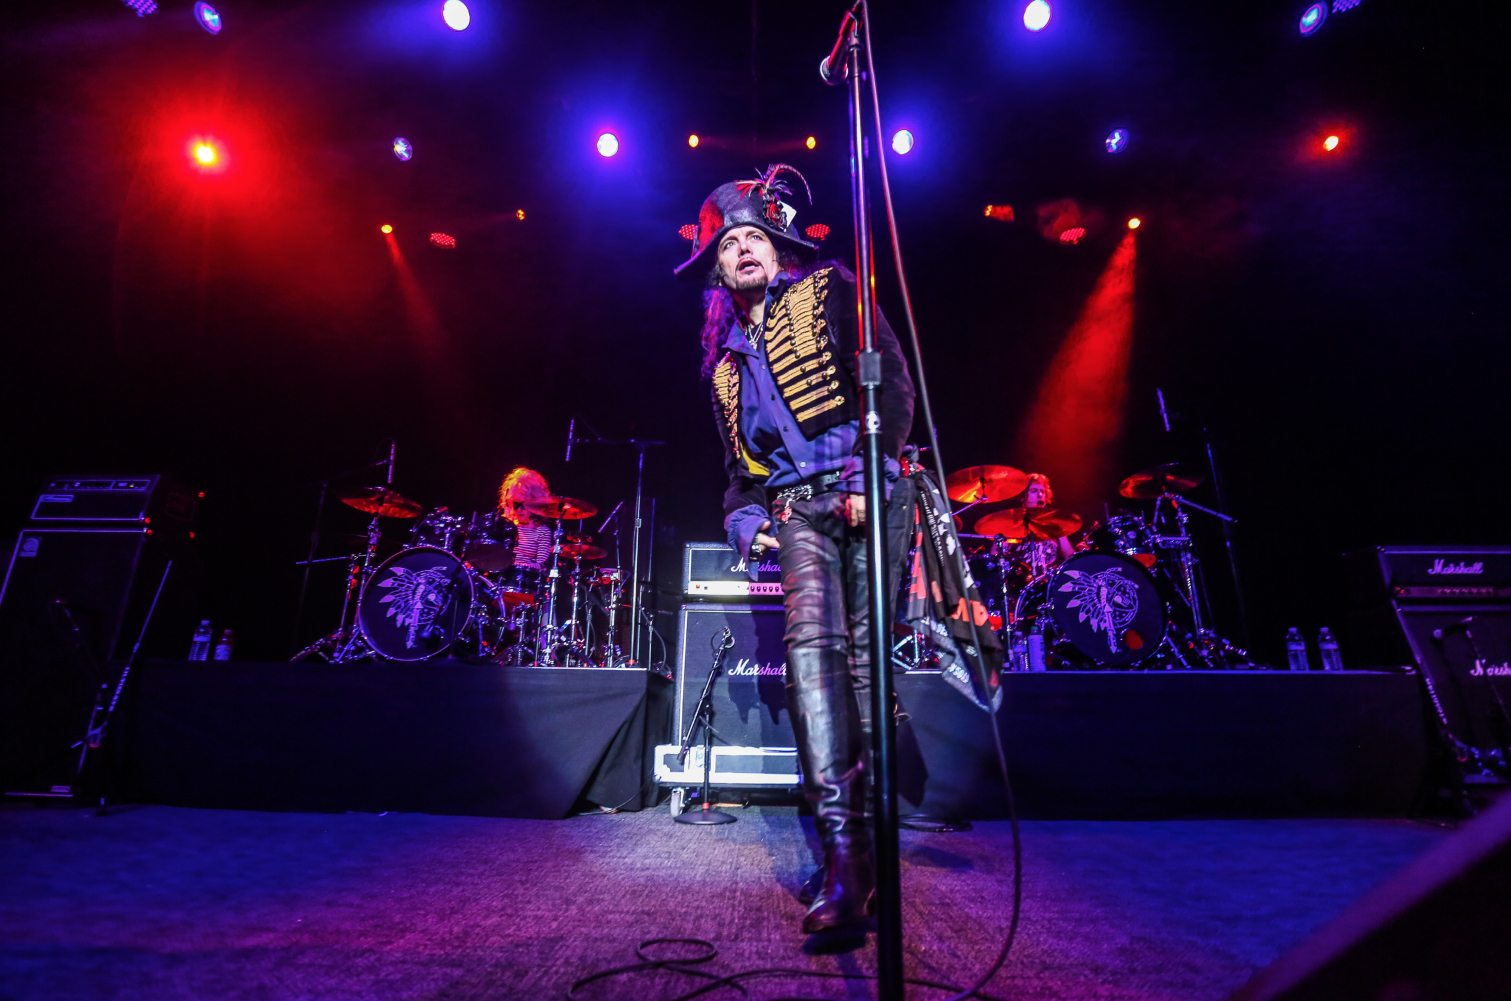 Adam Ant at the Fillmore in San Francisco, Calif. - Photos by Louis Raphael Photography